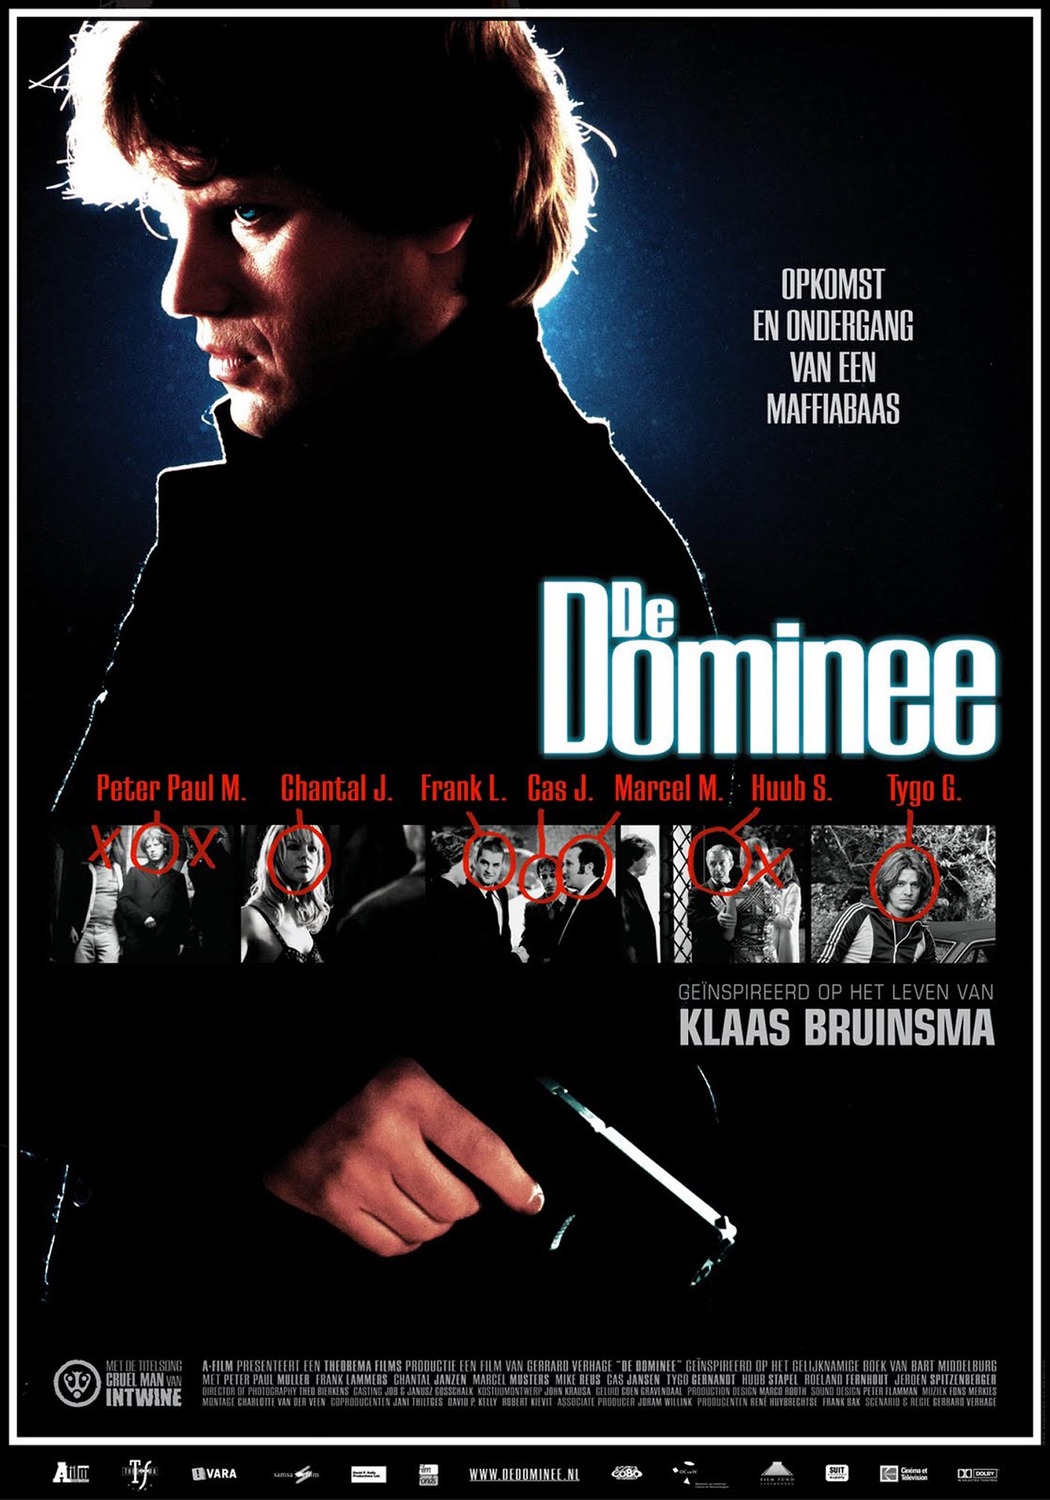 Extra Large Movie Poster Image for De dominee 